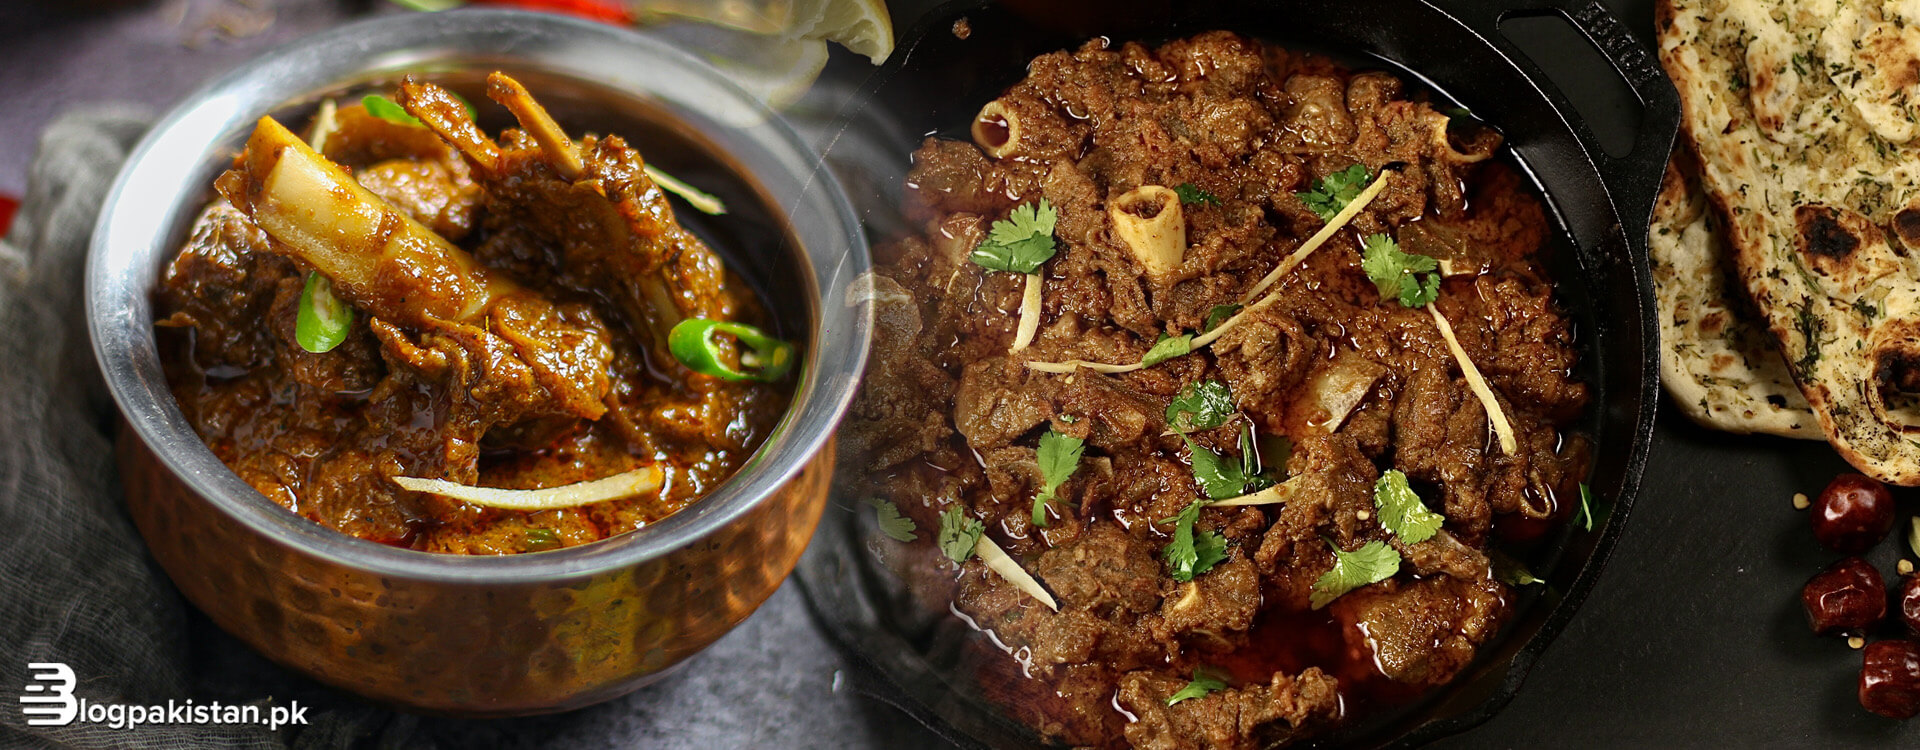 6 BEST Mutton Karahi Spots in Islamabad You Must Try